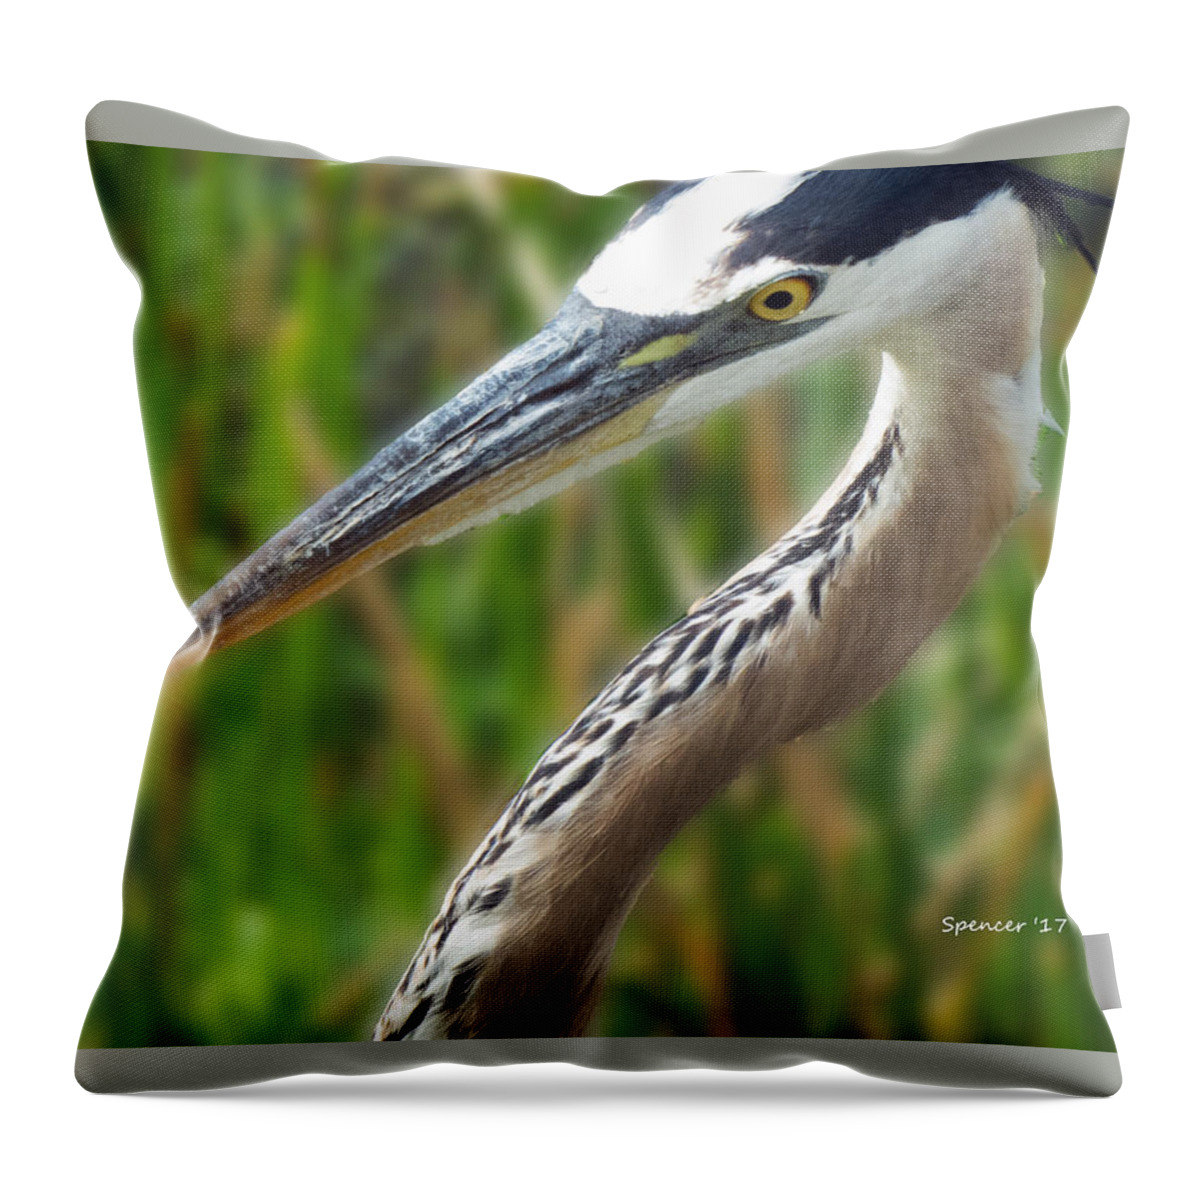 Florida Throw Pillow featuring the photograph Heron Head by T Guy Spencer